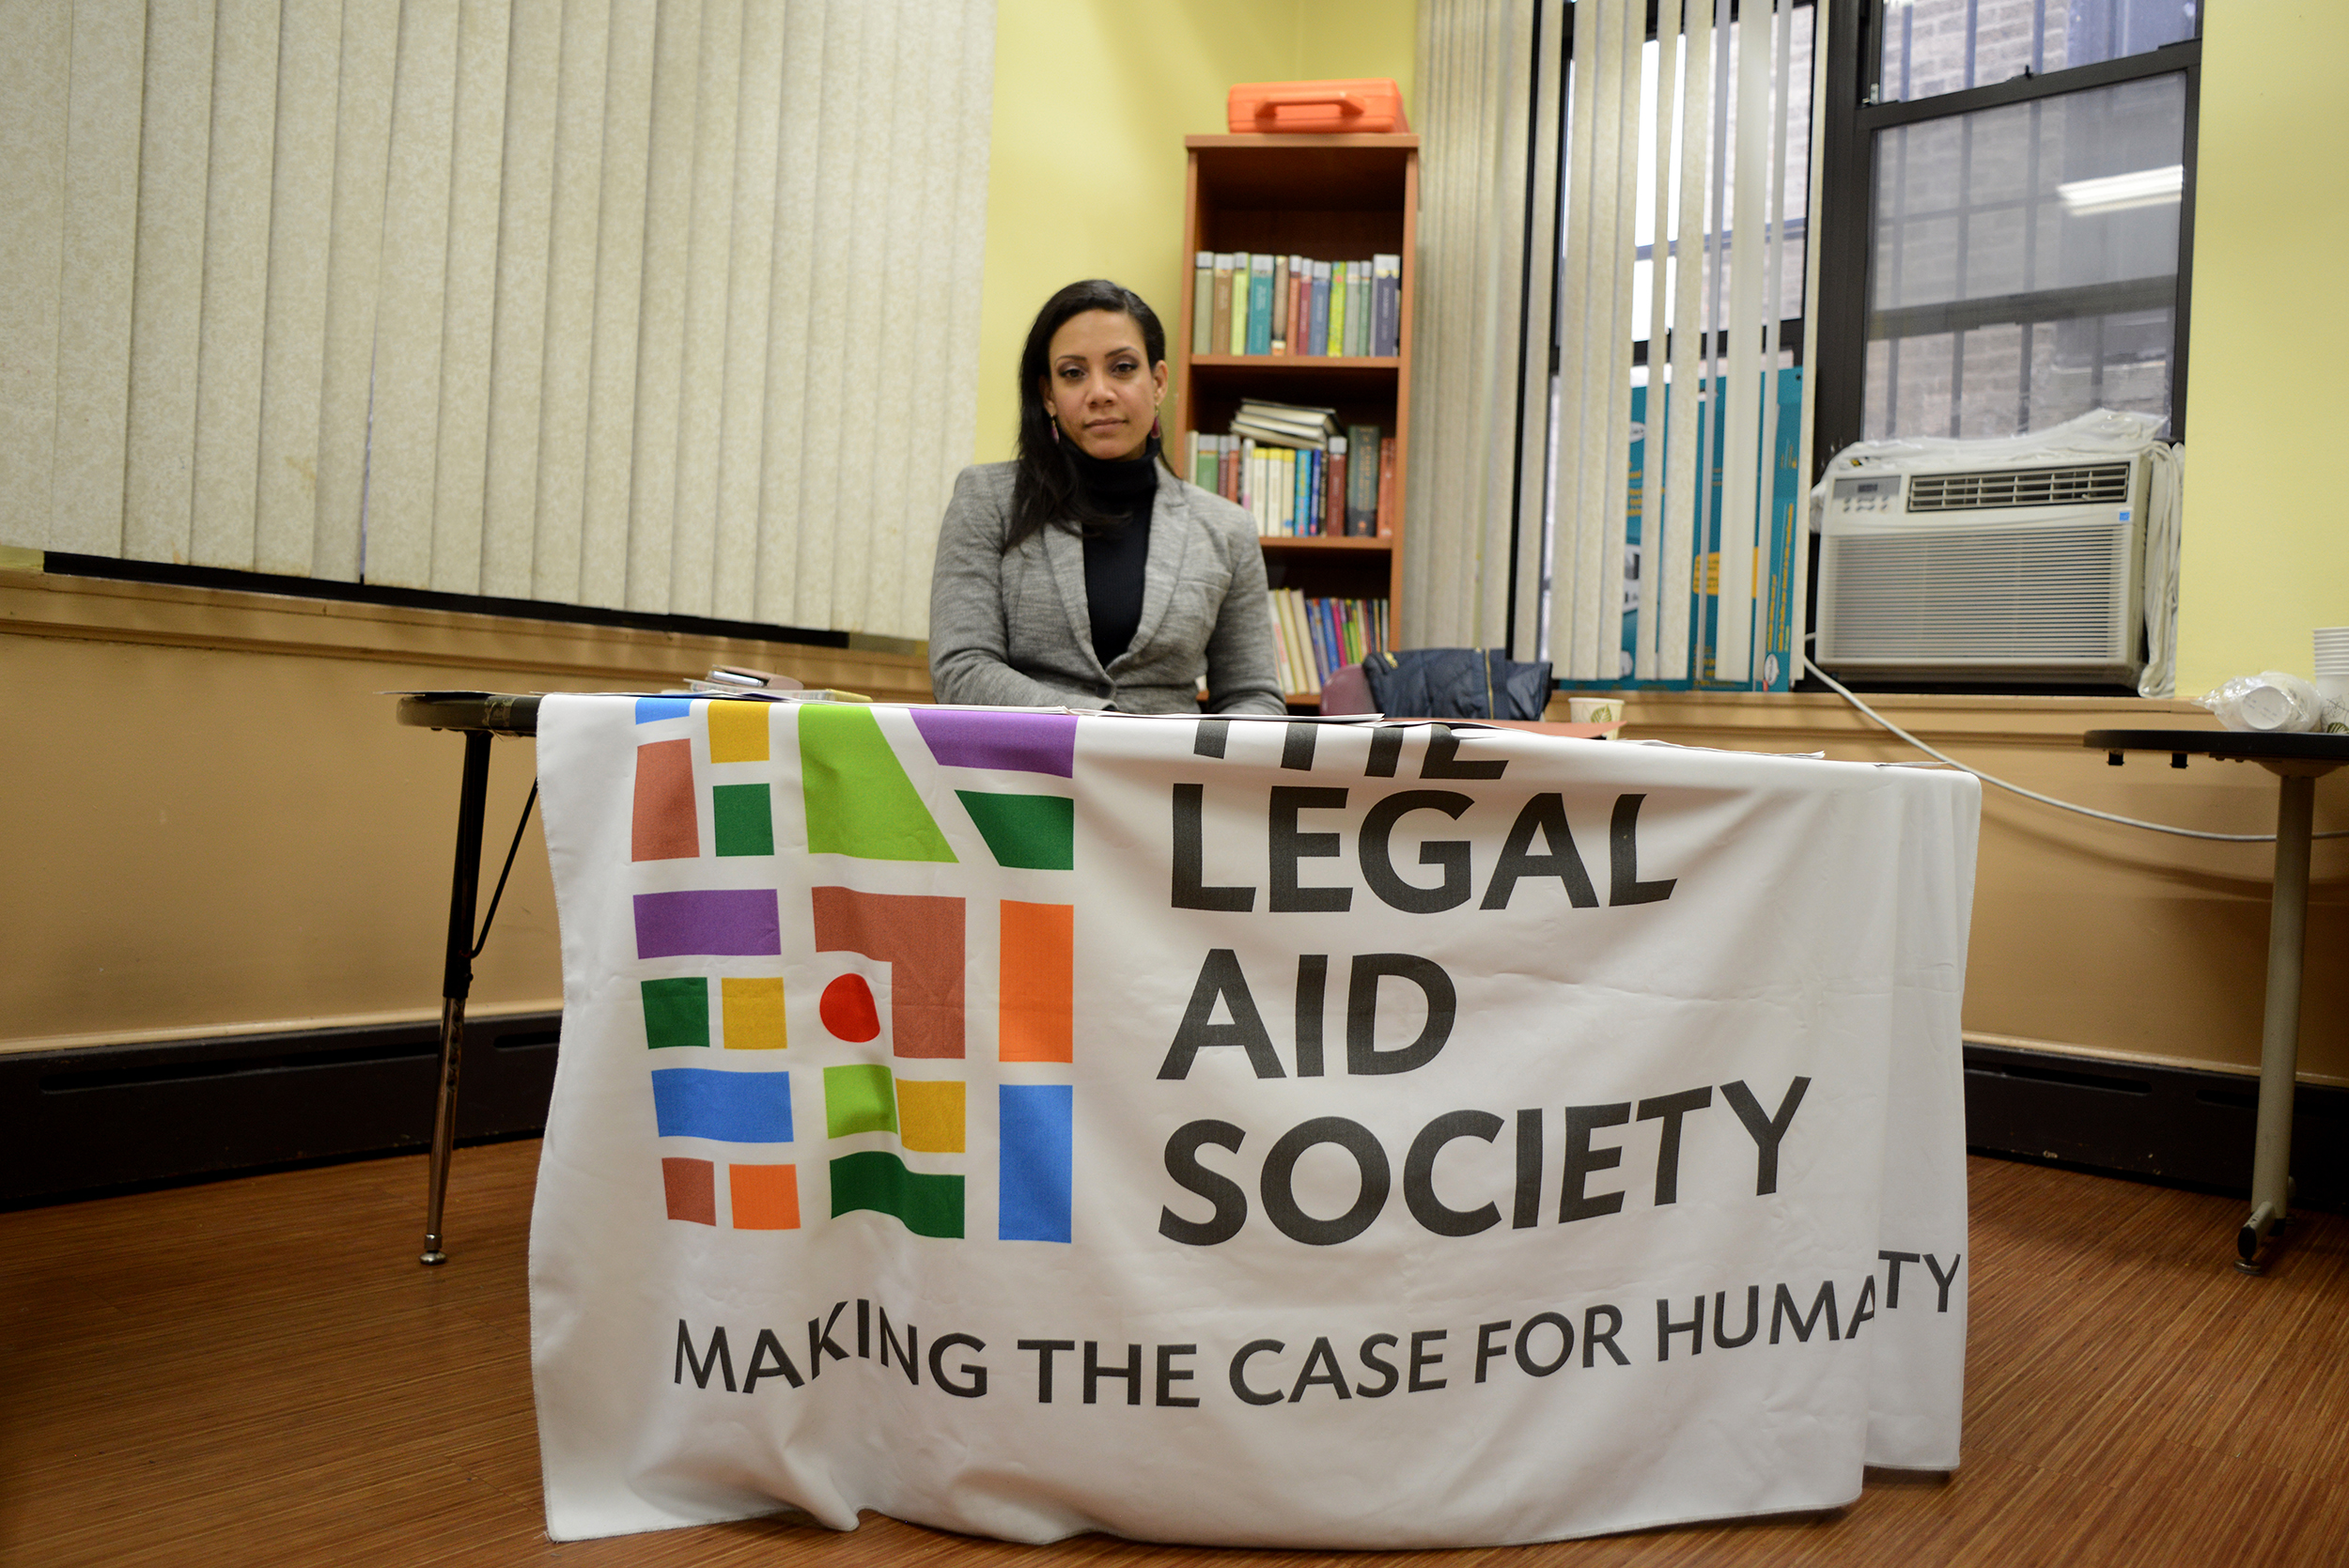 The Legal Aid Society can assit homeowners with a range of financial and legal issues including mortgage modifications, reveiw of legal documents, and access to STAR. 